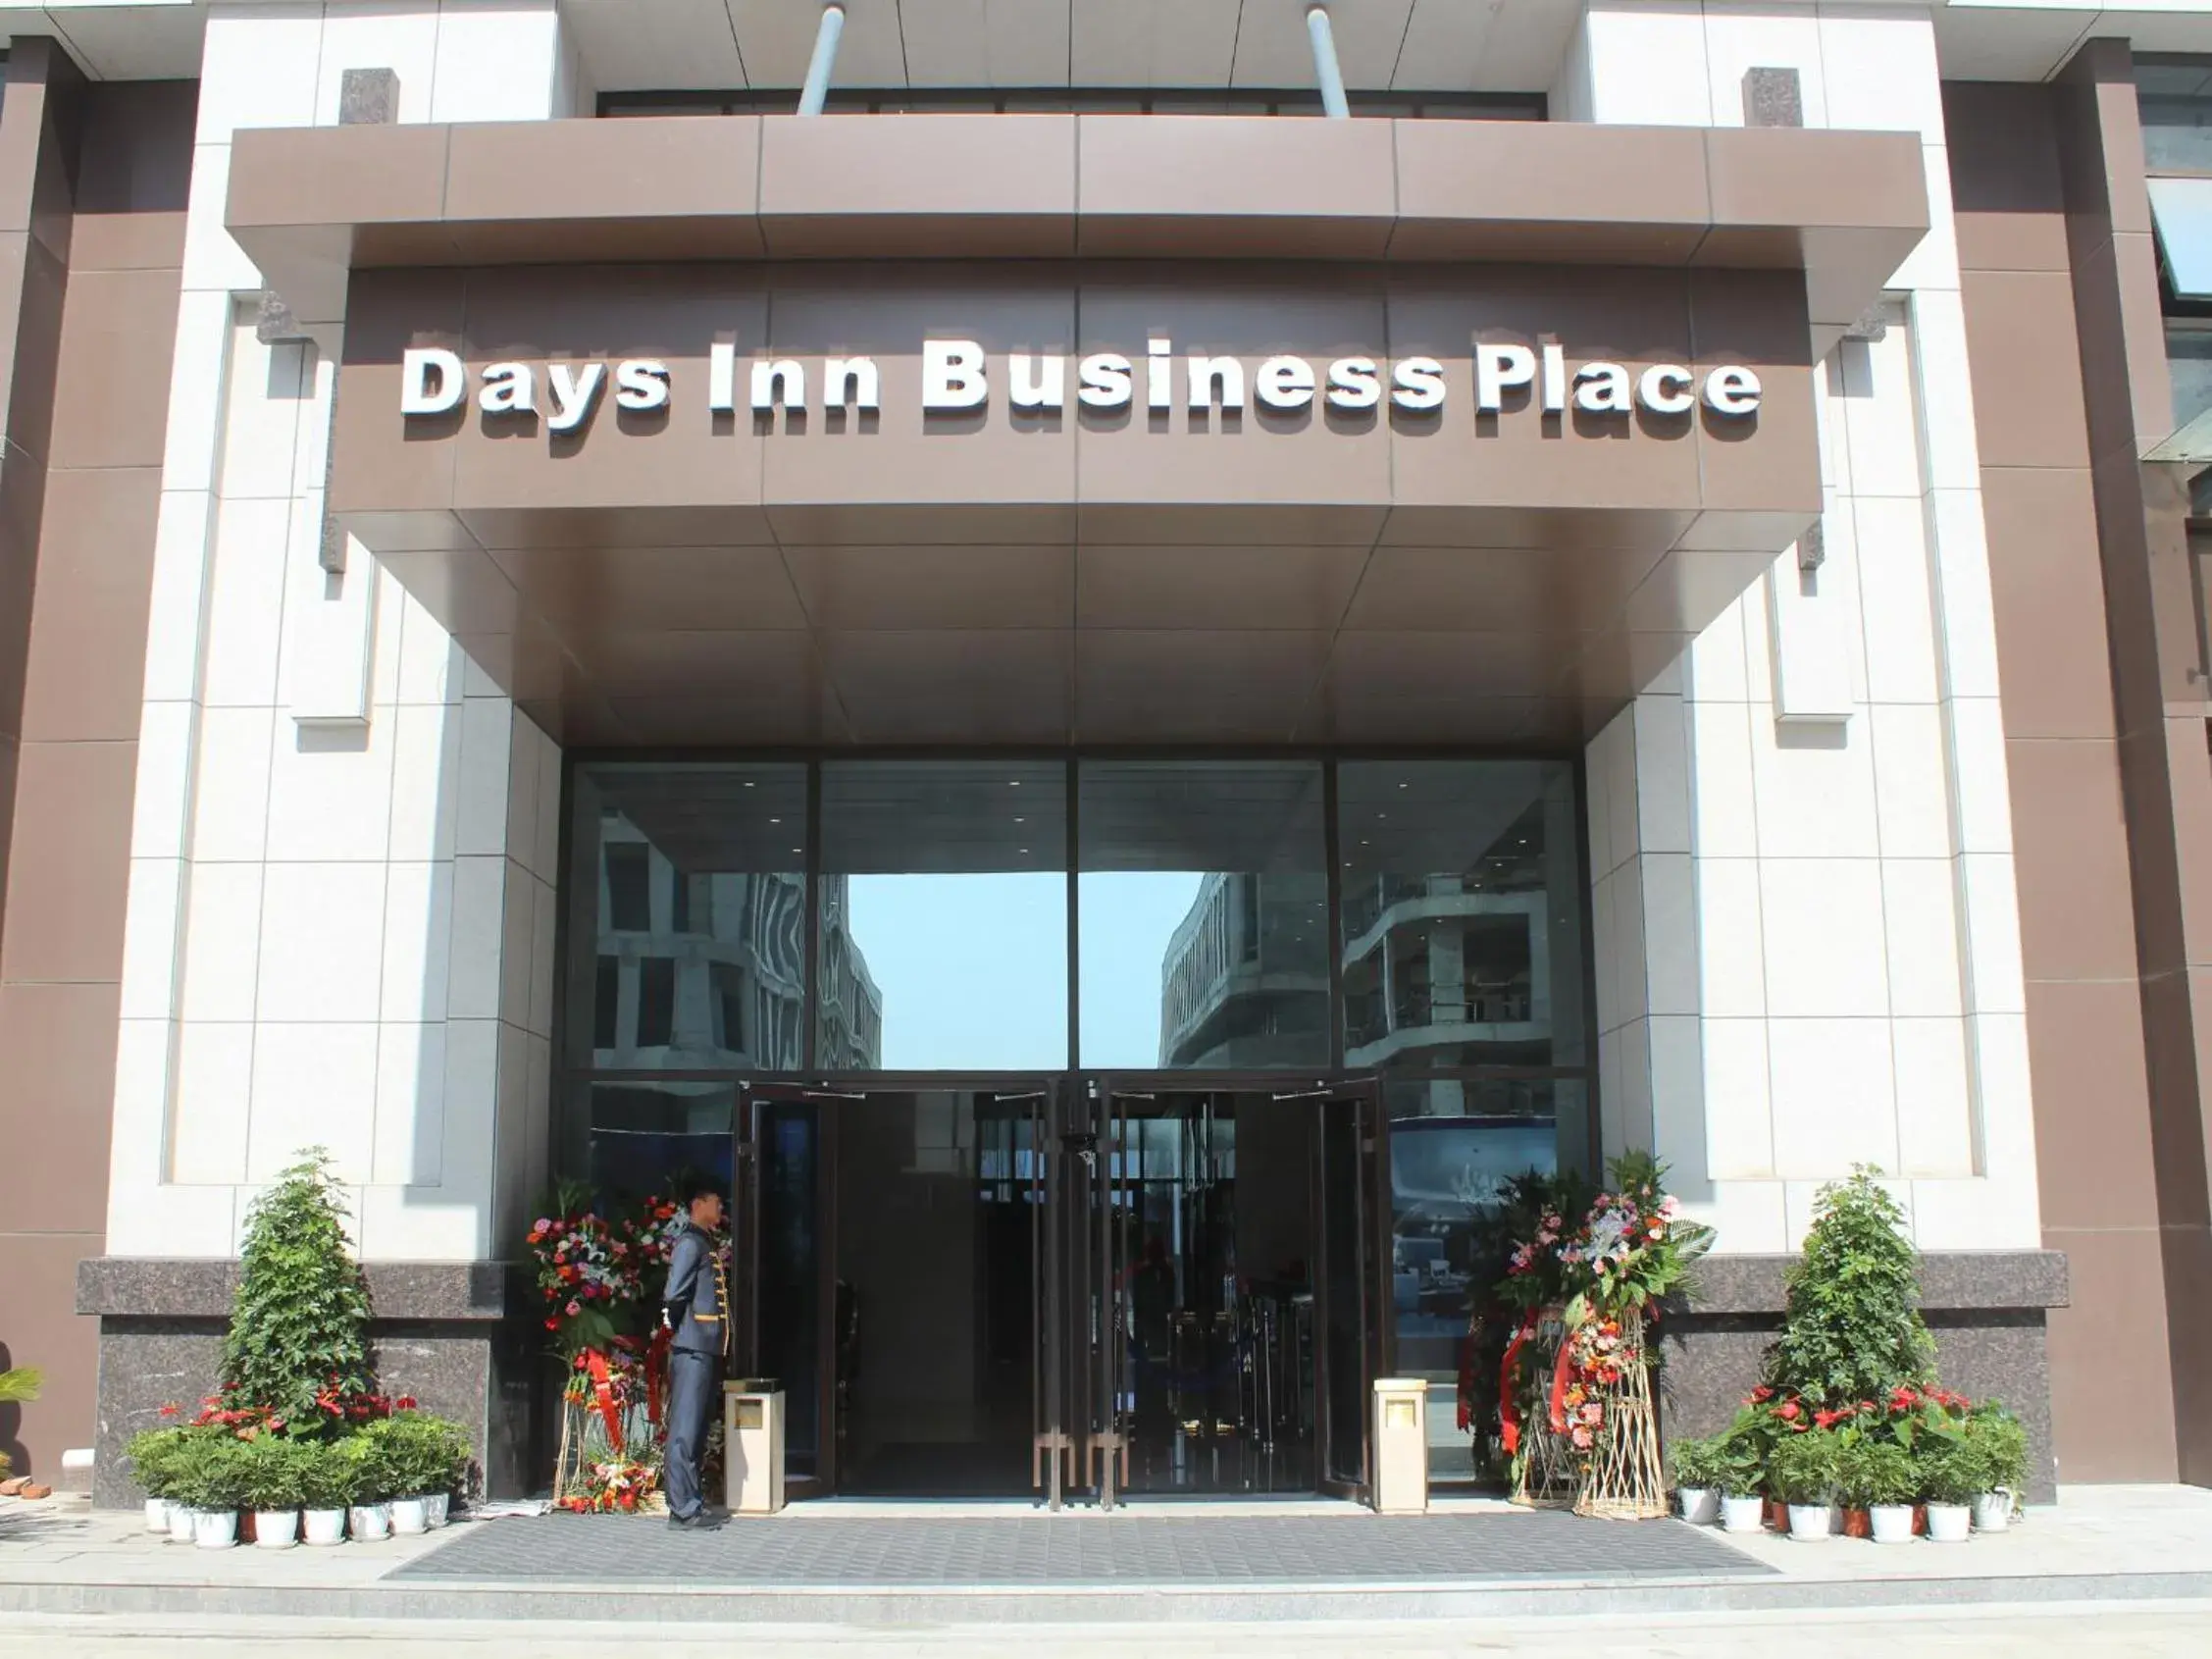 Property building, Property Logo/Sign in Days Inn Business Place Goldwin Yantai